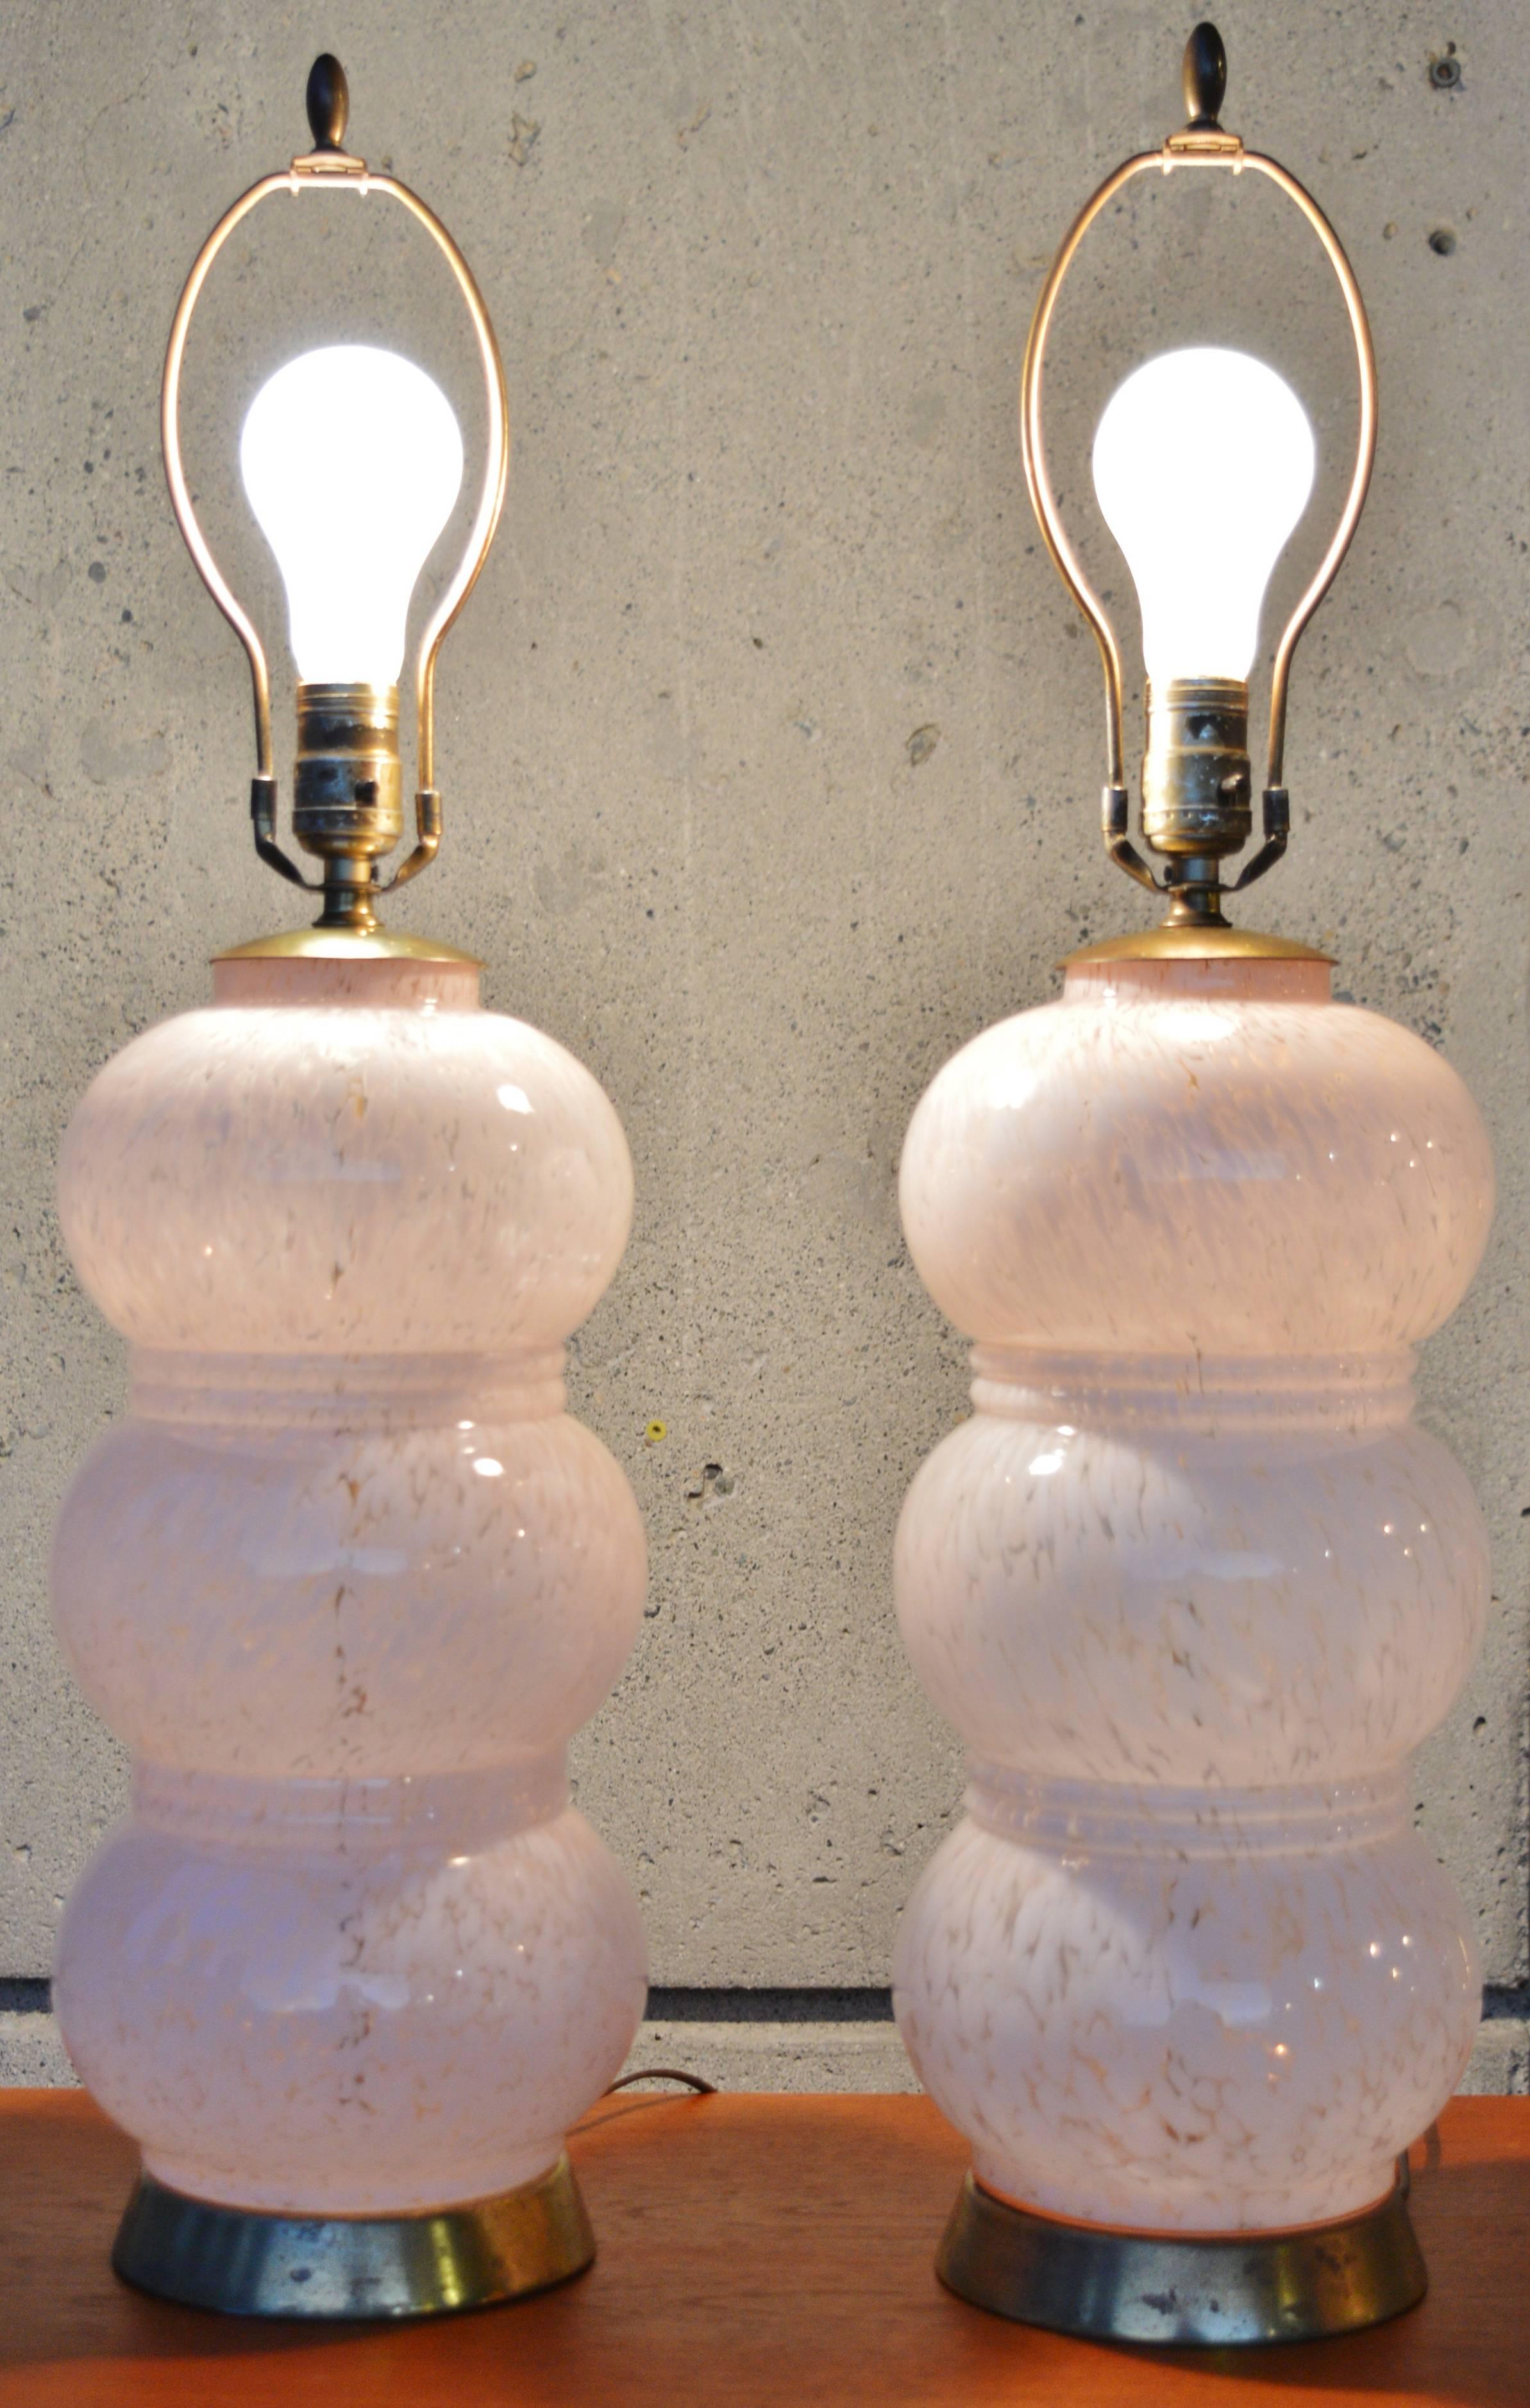 This striking pair of Murano stacked lamps are in the most lovely soft rose quartz hue mottled with clear the 2016 Pantone color of the year! Featuring three stacked balls that are each separated by a double band. The glass is in excellent